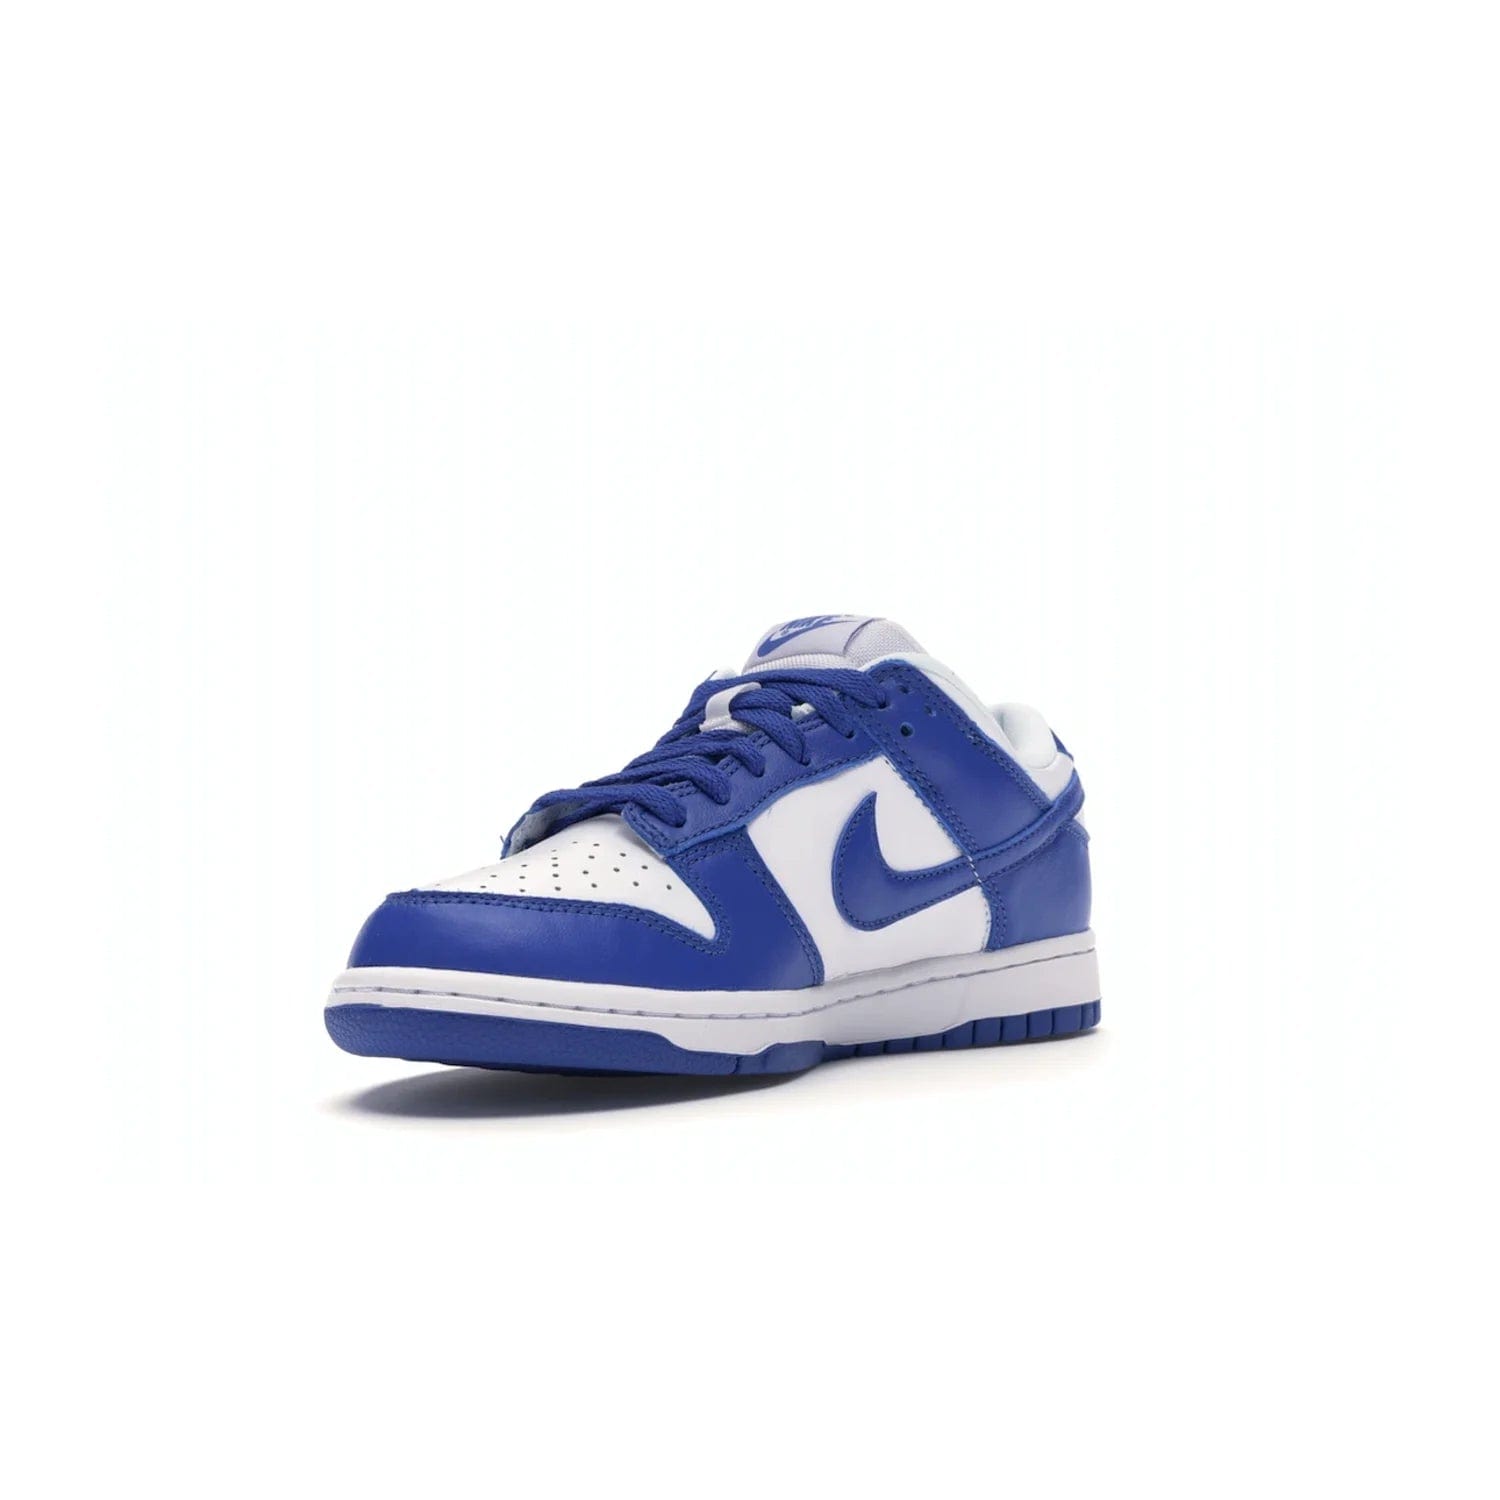 Nike Dunk Low SP Kentucky (2020/2022) - Image 14 - Only at www.BallersClubKickz.com - Classic Nike Dunk Low SP Kentucky with timeless White/Varsity Royal colorway. White leather upper, royal outsole, and Nike branding. A hit since March 2020 homage to the 1985 Nike College Colors program. Show your support with these classic kicks.